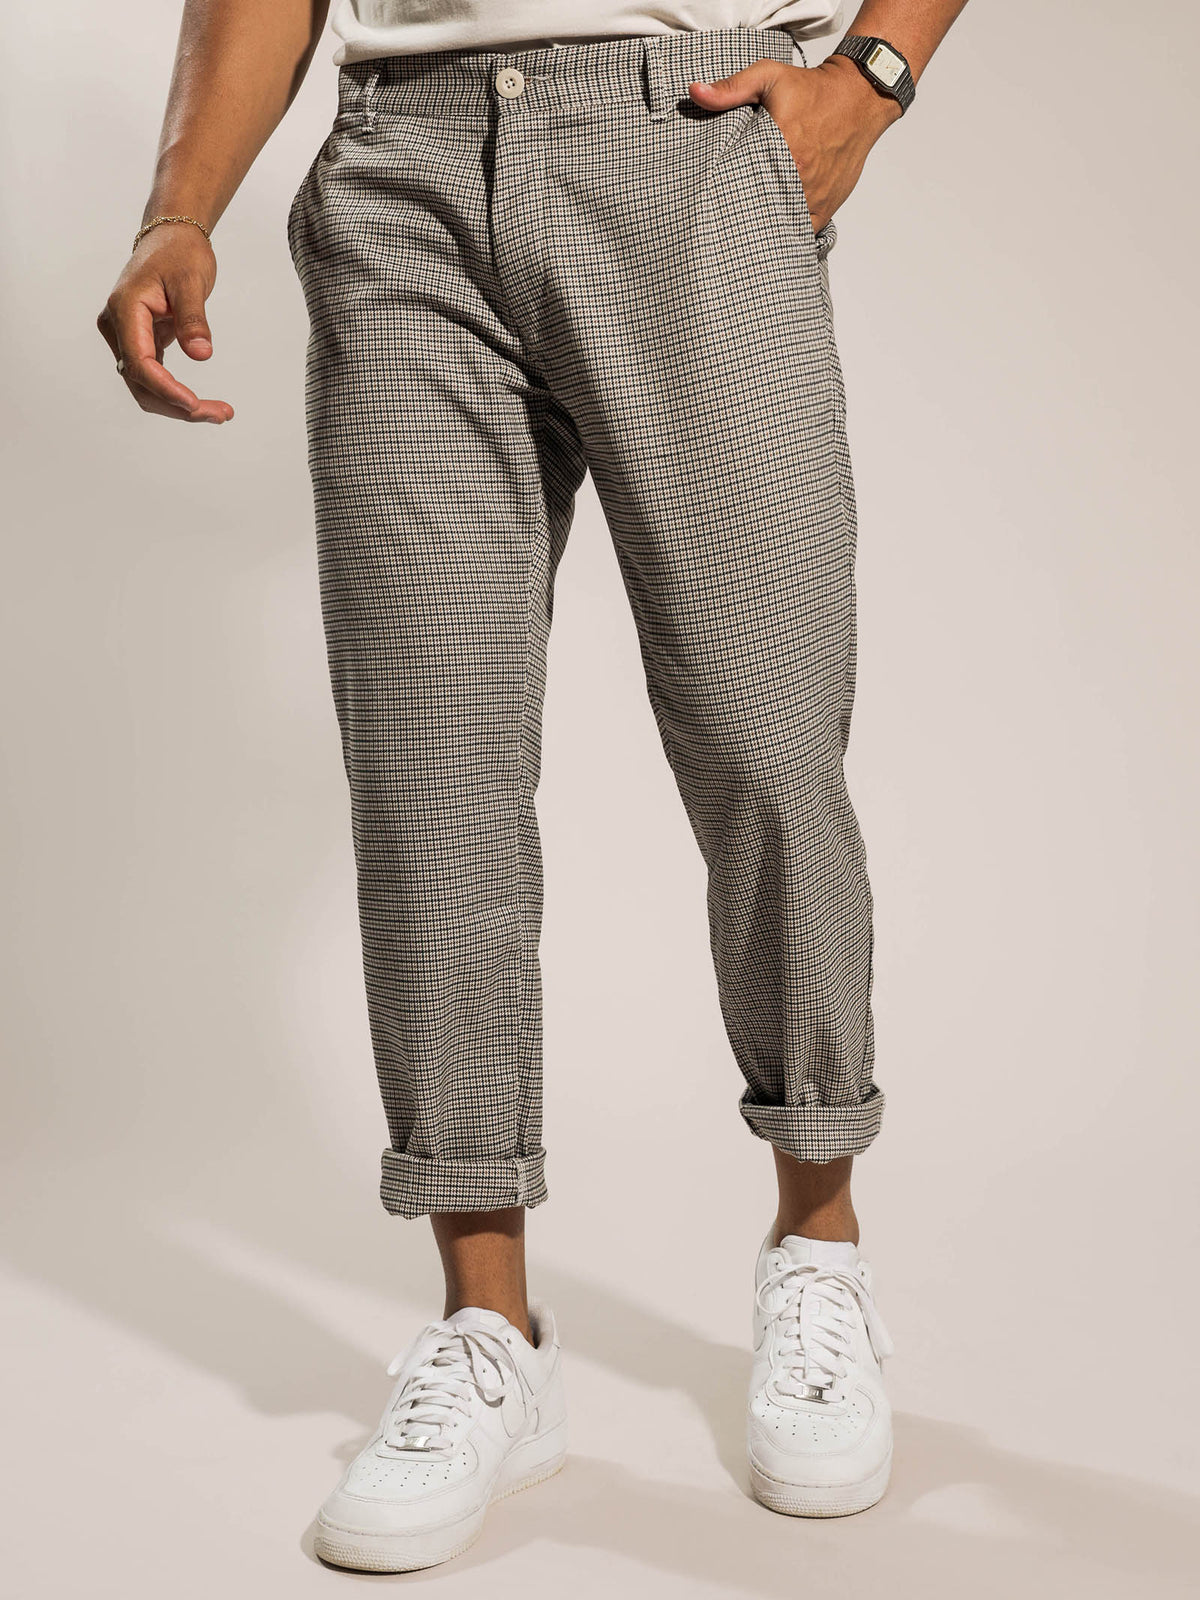 Maison Pant in Stone Houndstooth